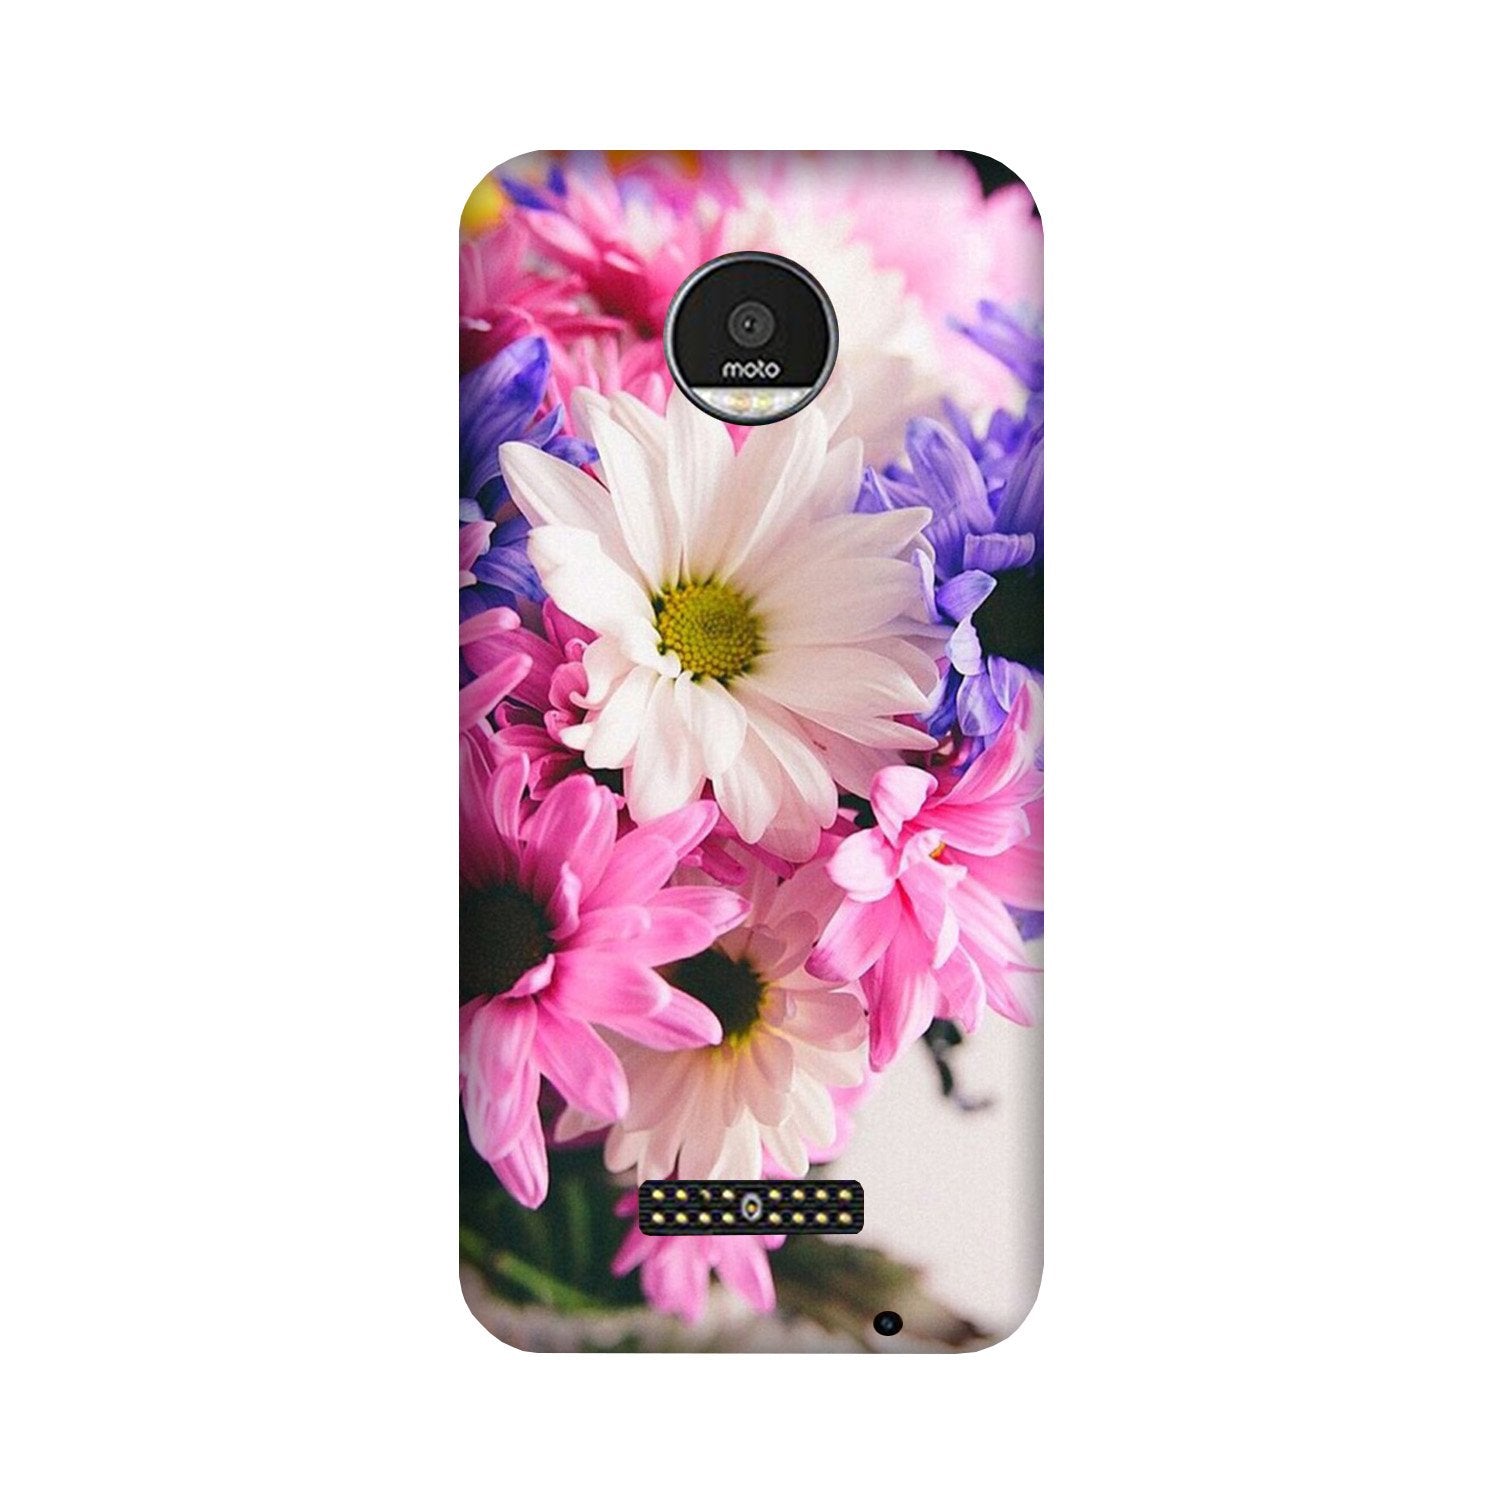 Coloful Daisy Case for Moto Z2 Play